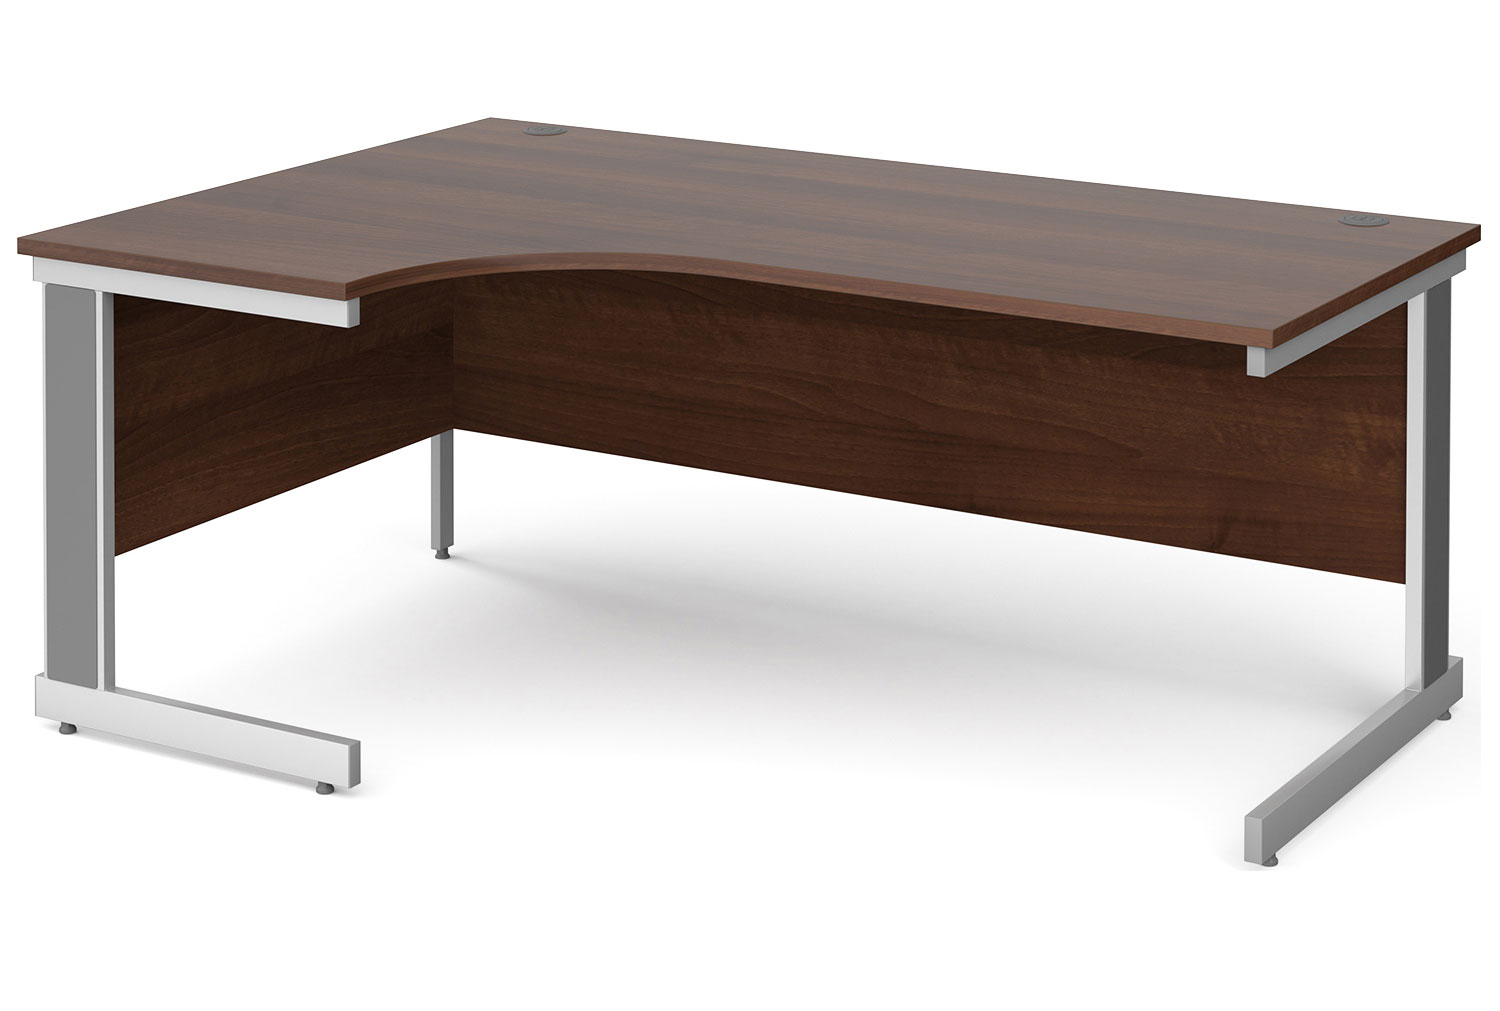 All Walnut Deluxe Left Hand Ergonomic Office Desk, 180wx120/80dx73h (cm), Express Delivery